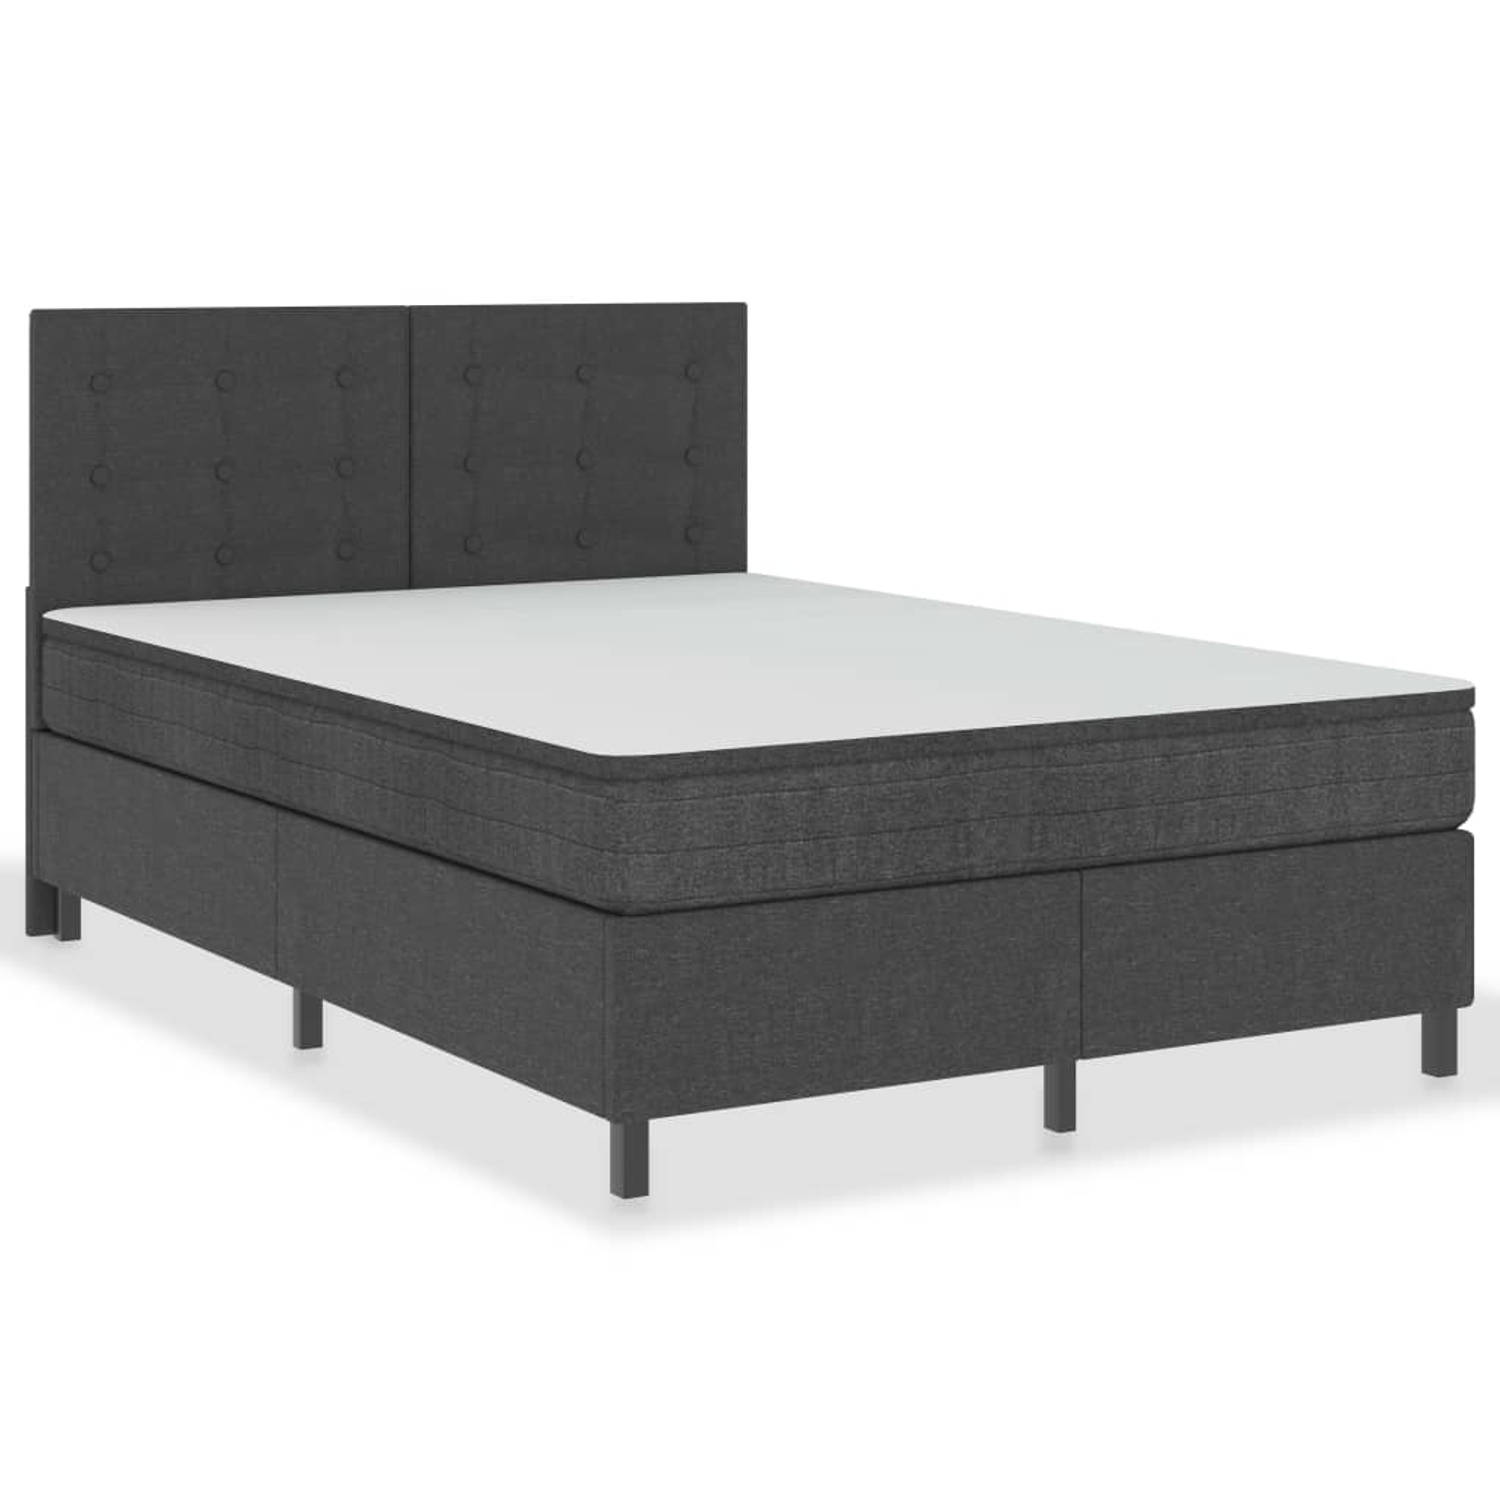 The Living Store Boxspring stof donkergrijs 140x200 cm - Boxspring - Boxsprings - Boxspringbed - Boxspringbedden - Hotelbed - Hotelbedden - Bed - Bedden - Tweepersoonsbed - Tweeper